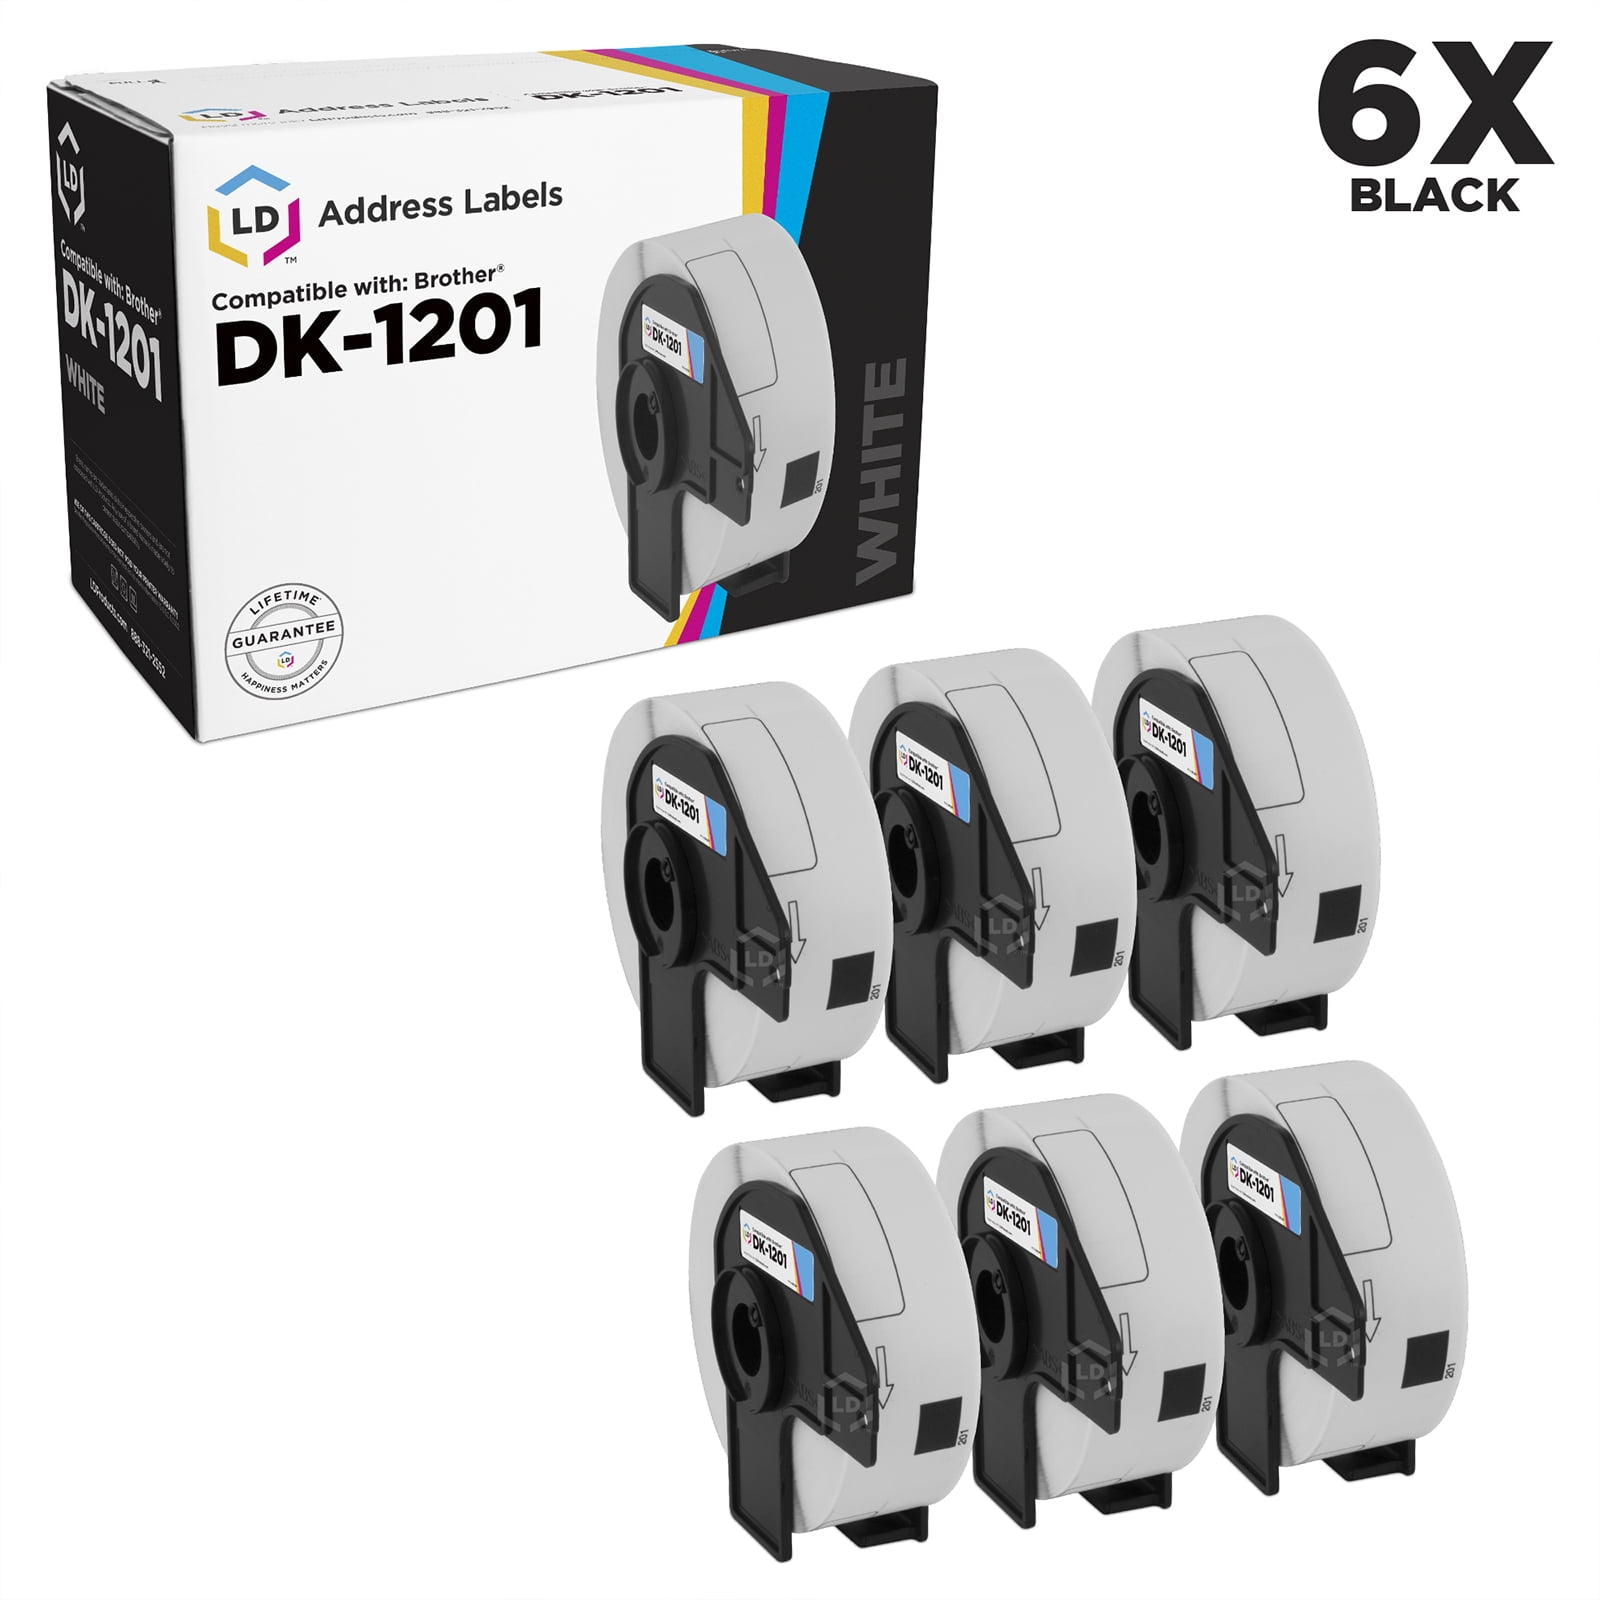 2 DK-1204 Replacement Rolls Compatible w/ Brother P-Touch Printer 